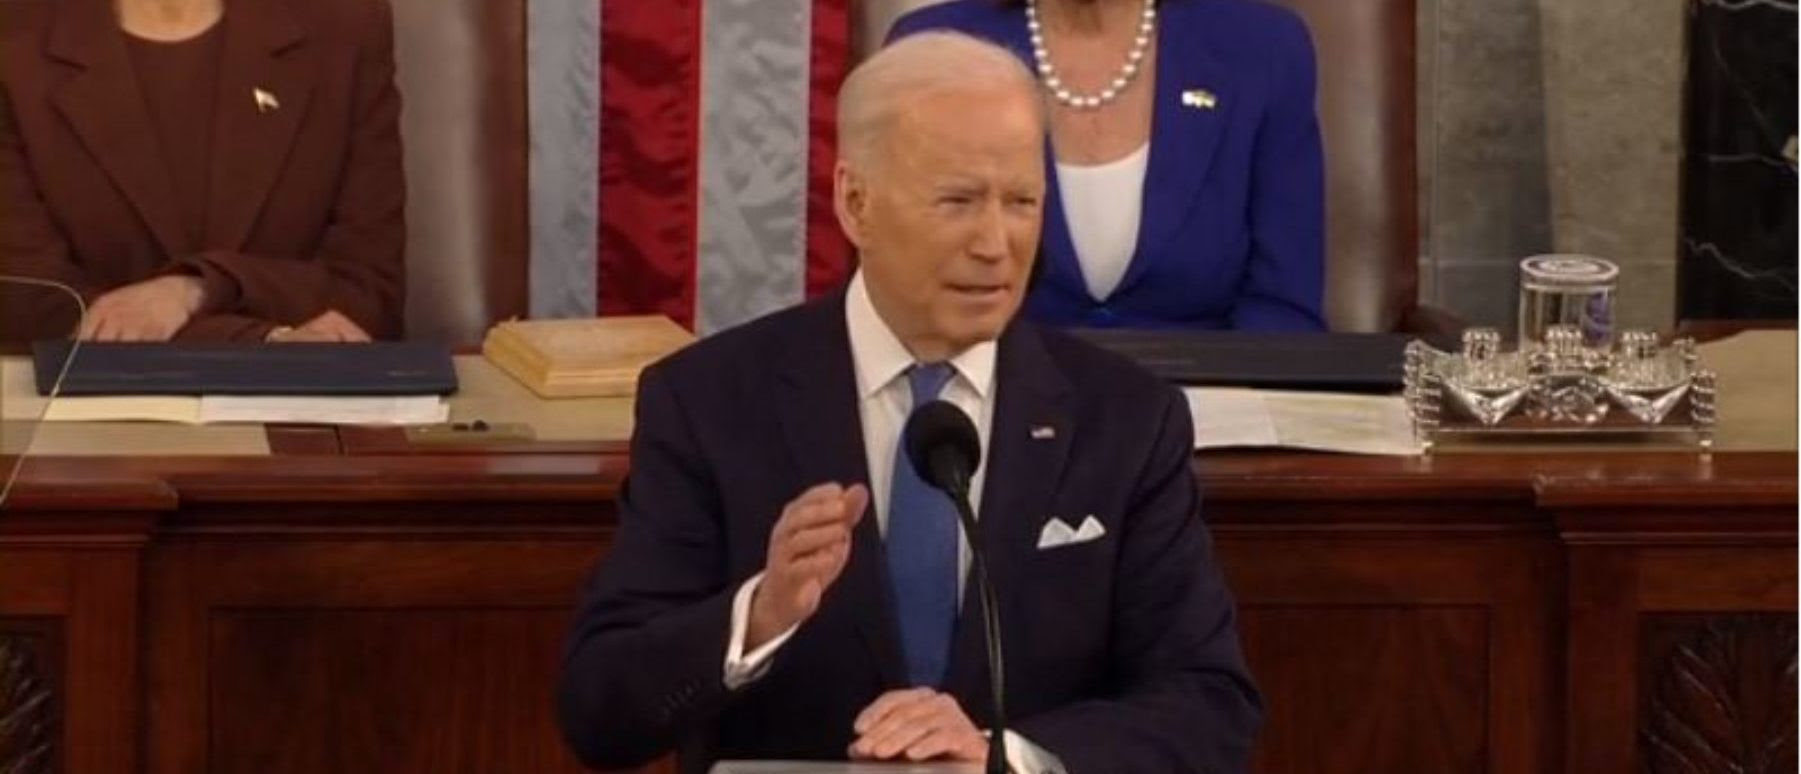 Biden Makes Urgent Plea For Increased Restrictions On Social Media In State Of The Union Address